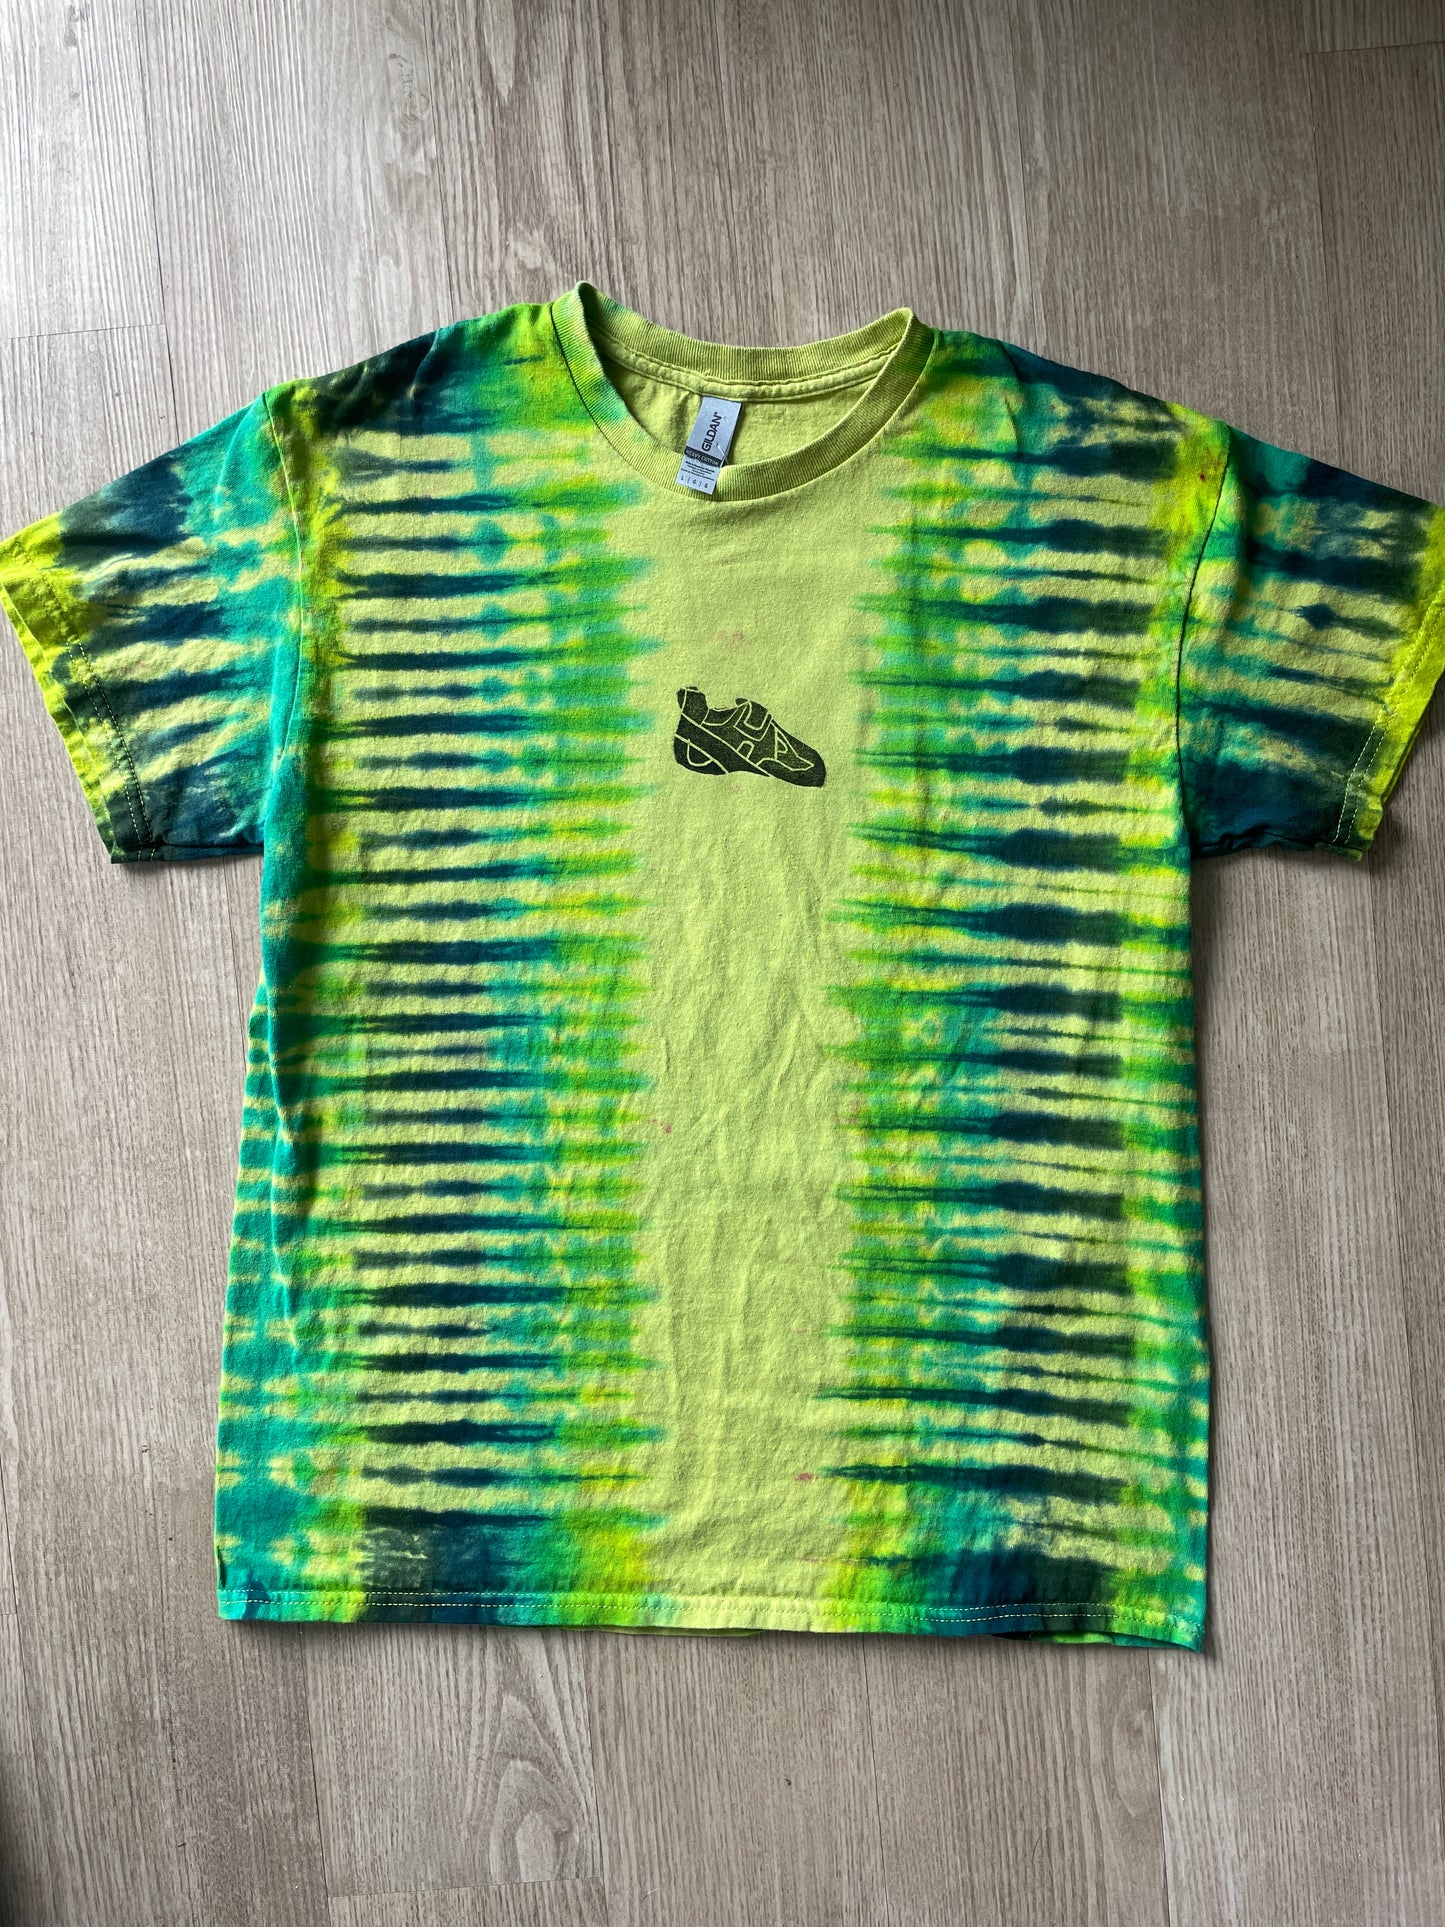 LARGE Men’s Climbing Shoe Handmade Tie Dyed T-Shirt | One-Of-a-Kind Yellow, Blue, and Green Pleated Short Sleeve